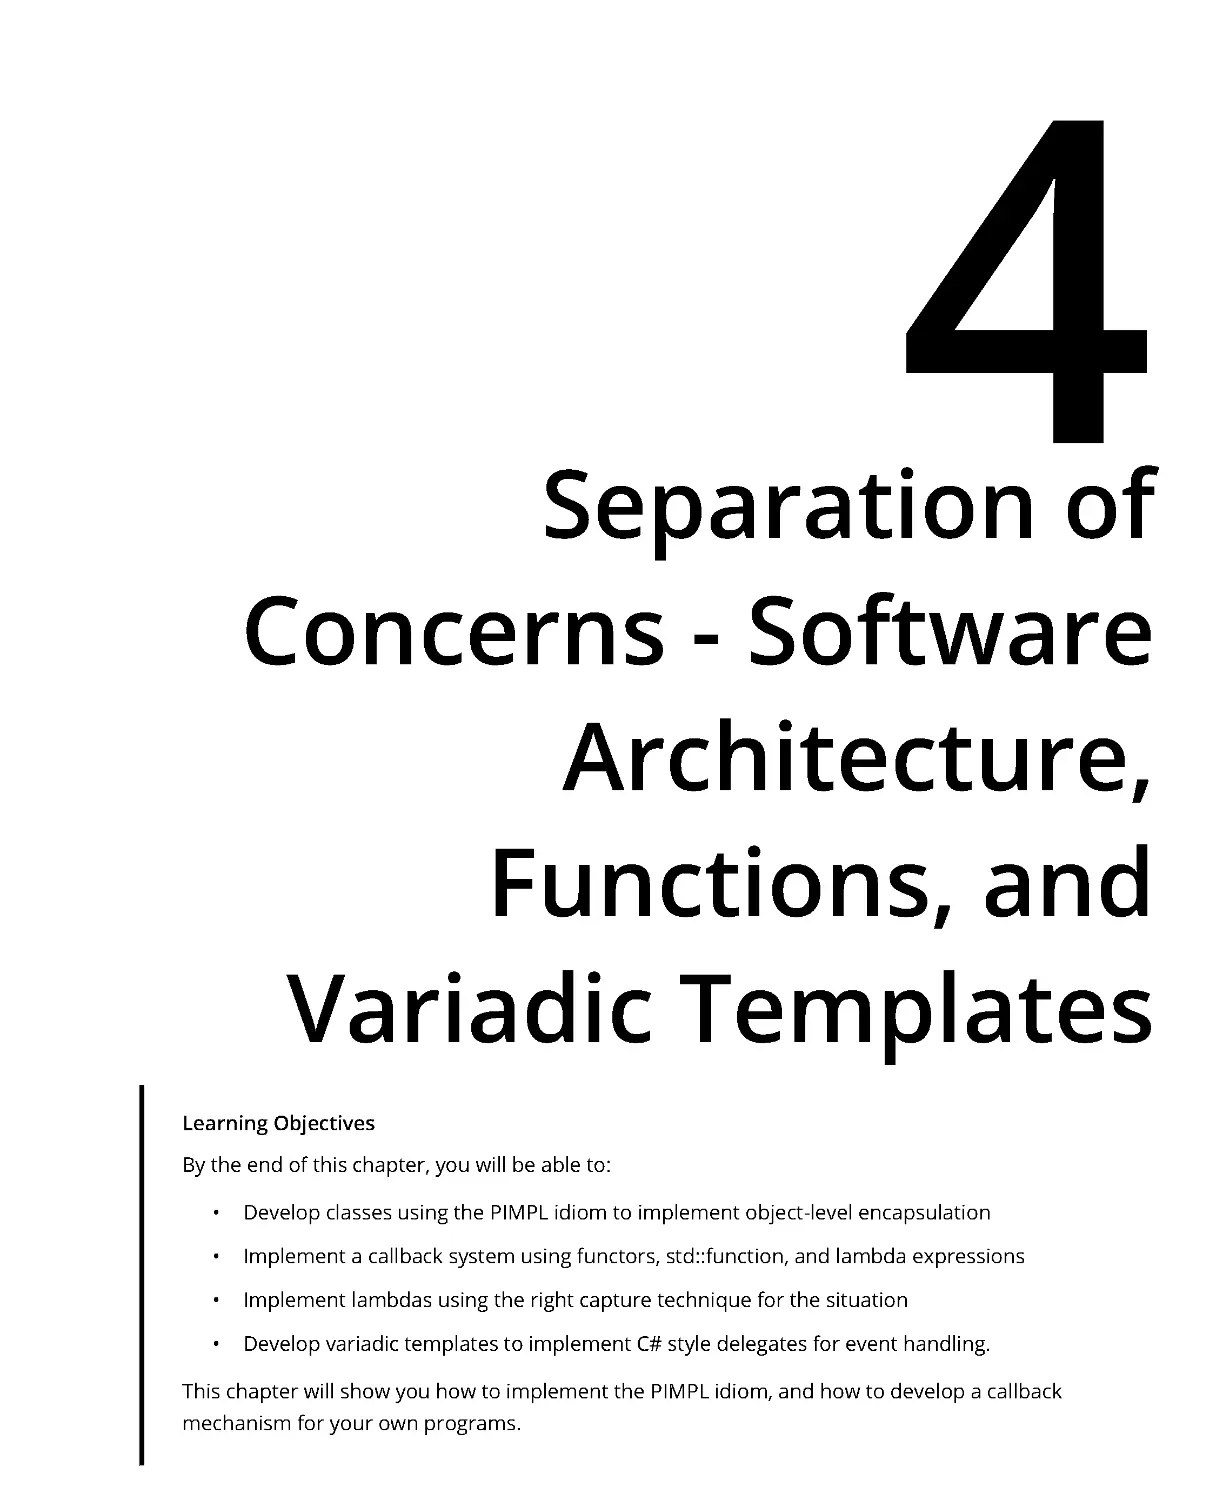 Chapter 4: Separation of Concerns - Software Architecture, Functions, and Variadic Templates